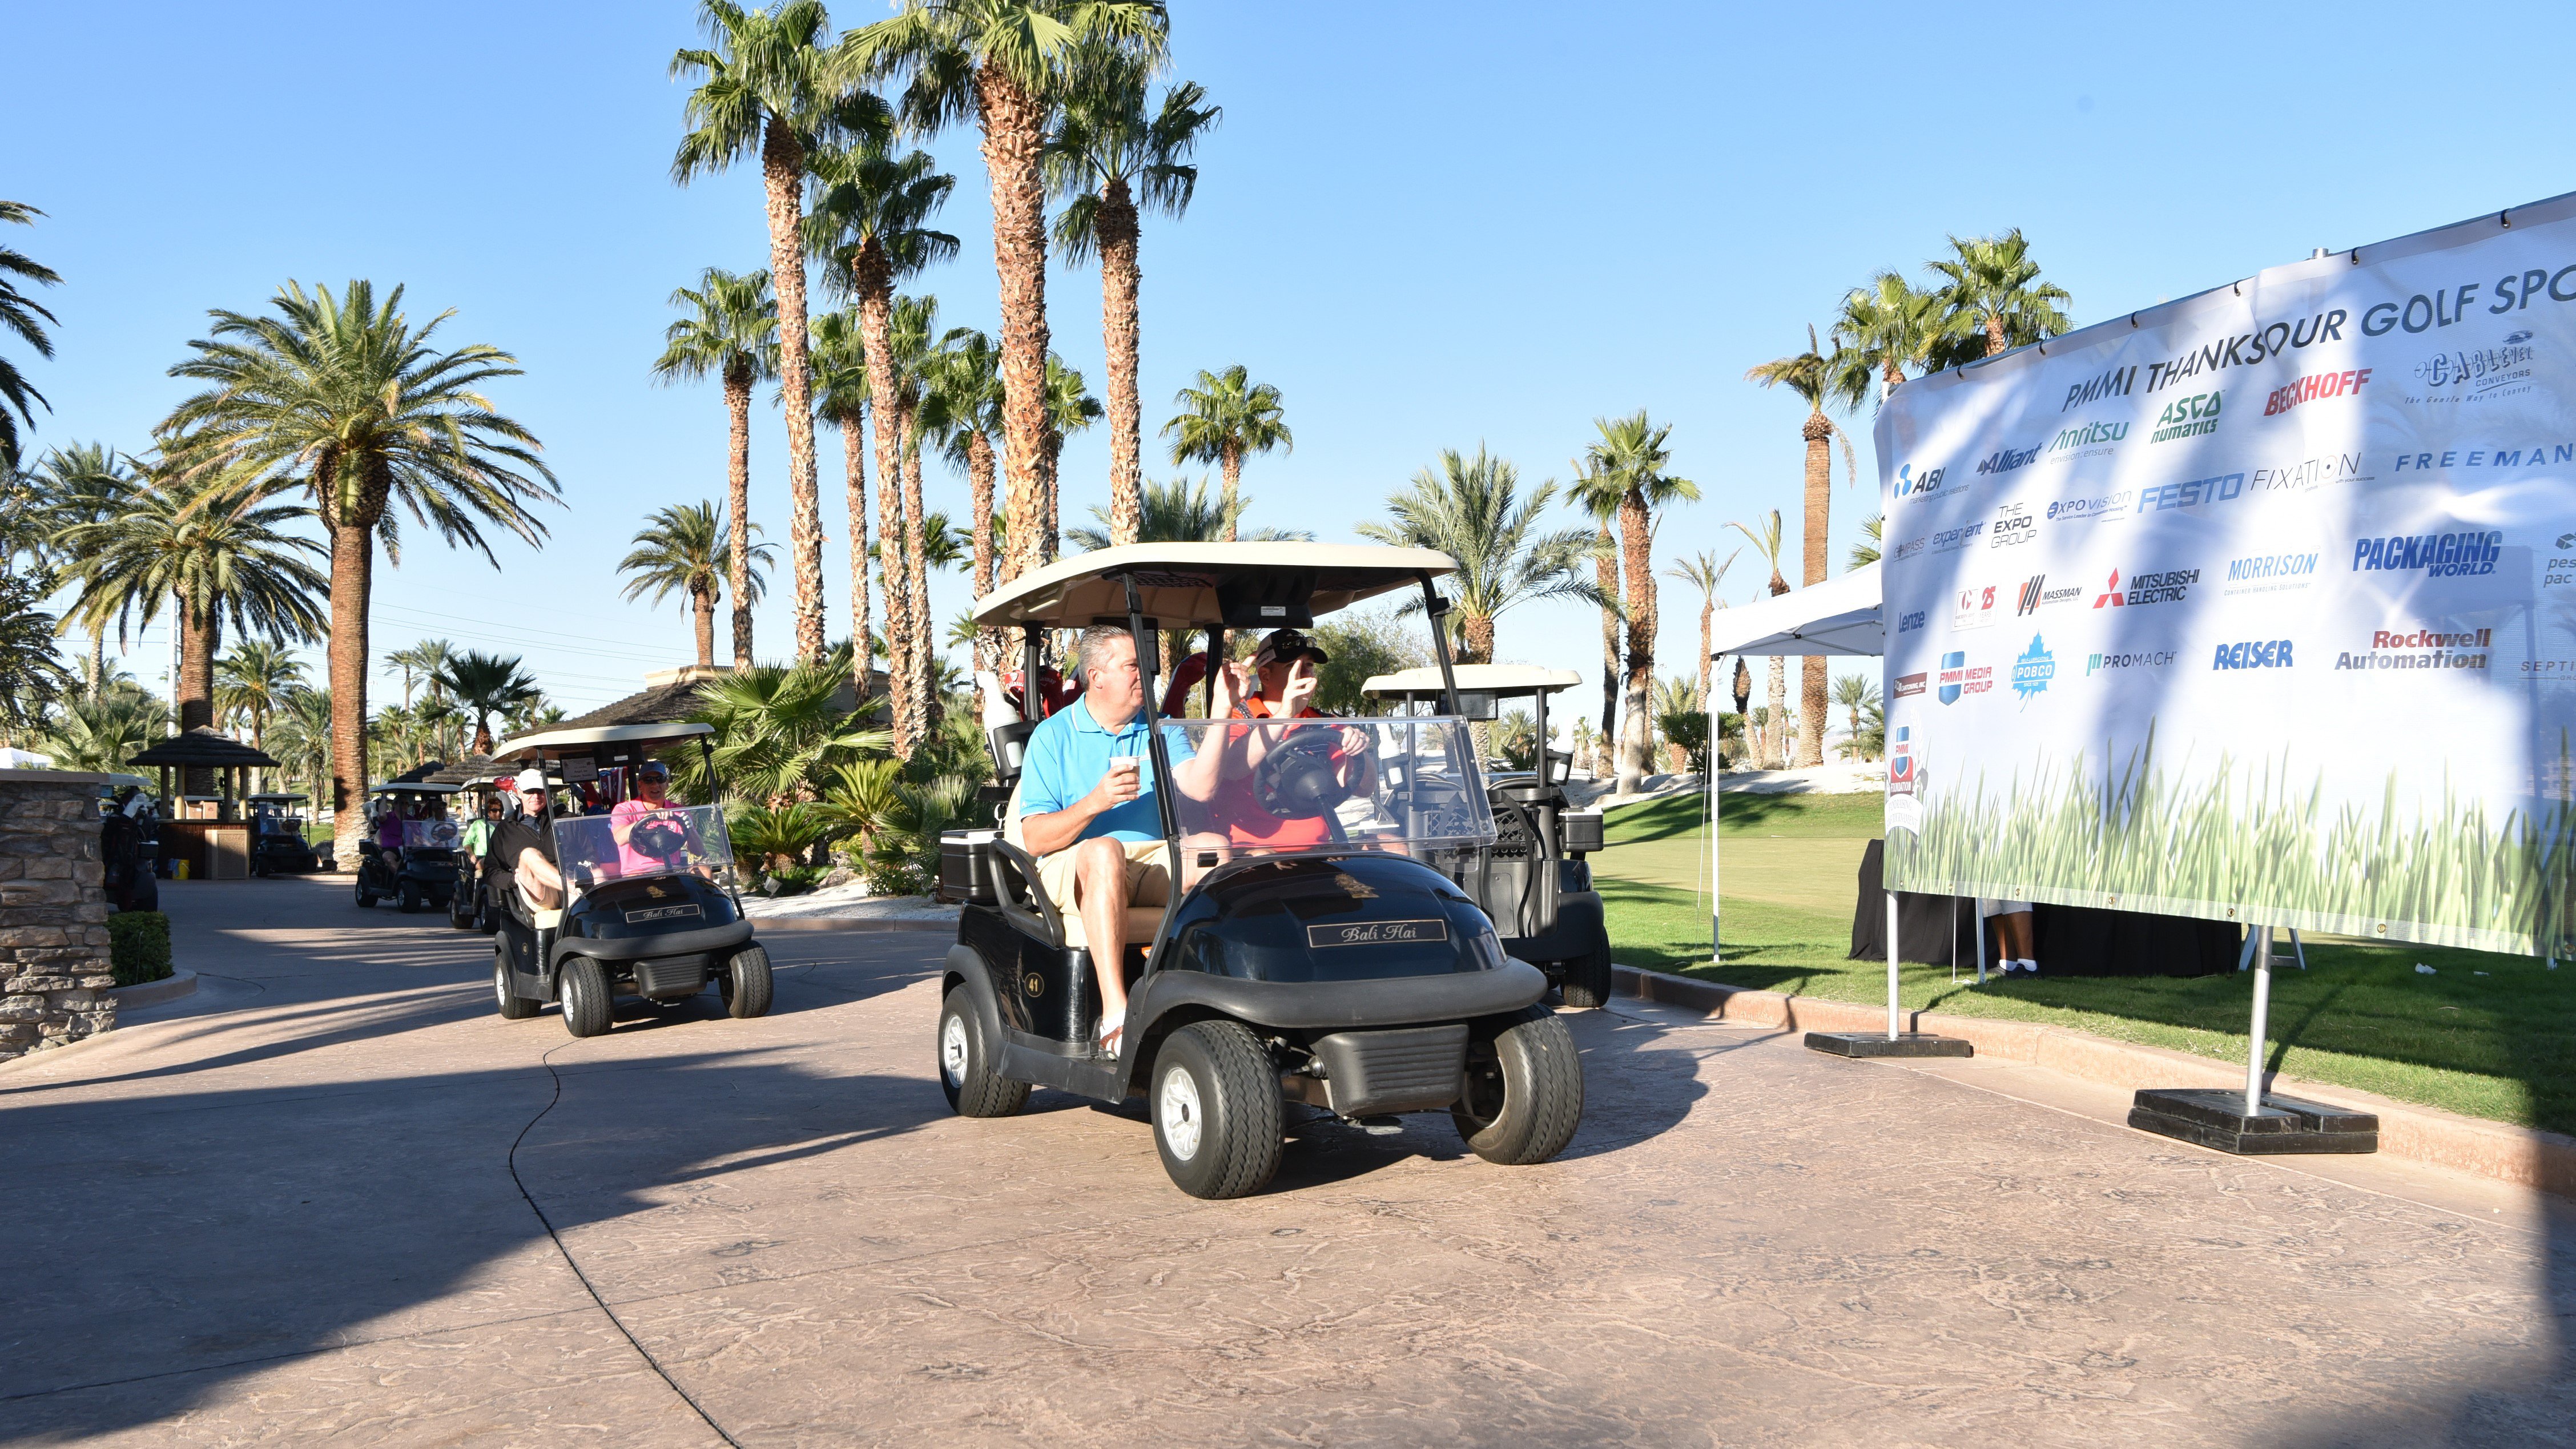 People sitting in golf carts with palm trees in the background